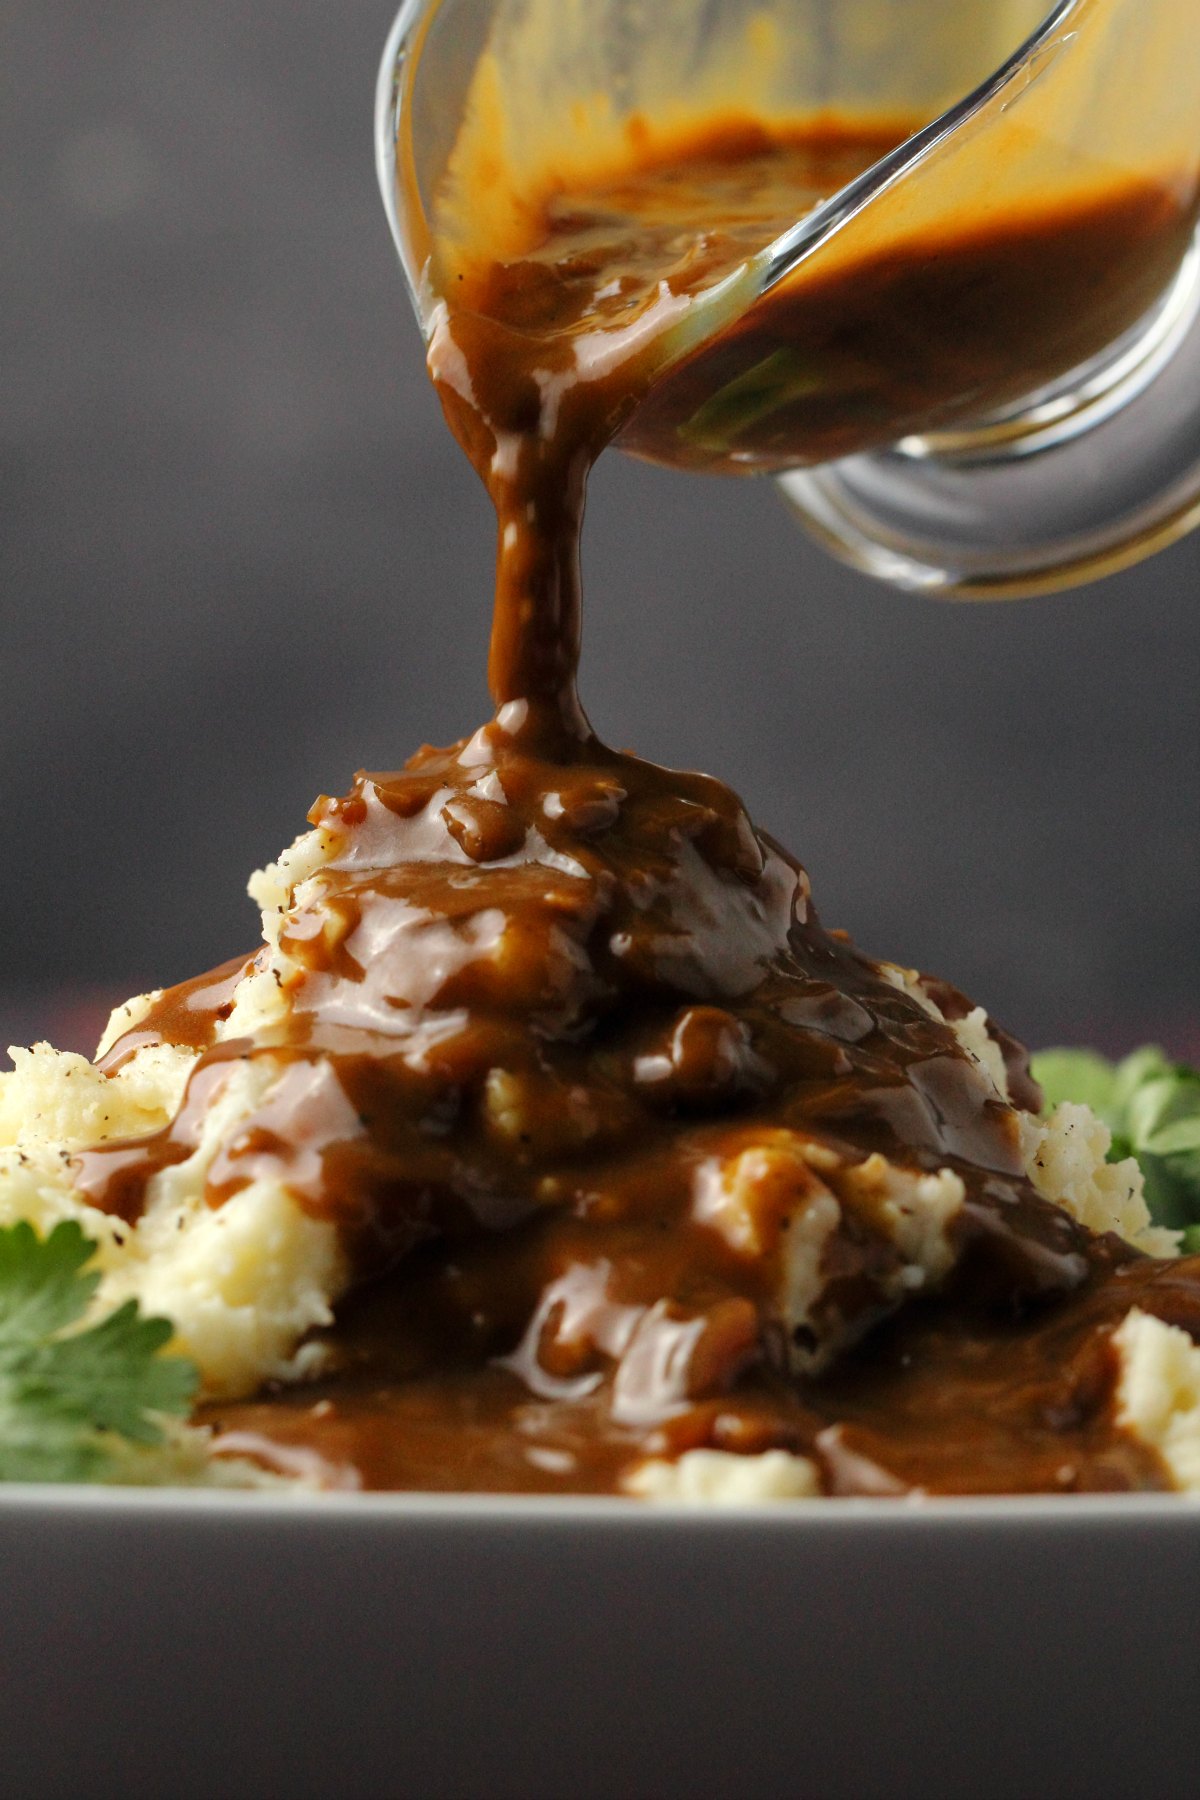 Gravy pouring over mashed potatoes. 